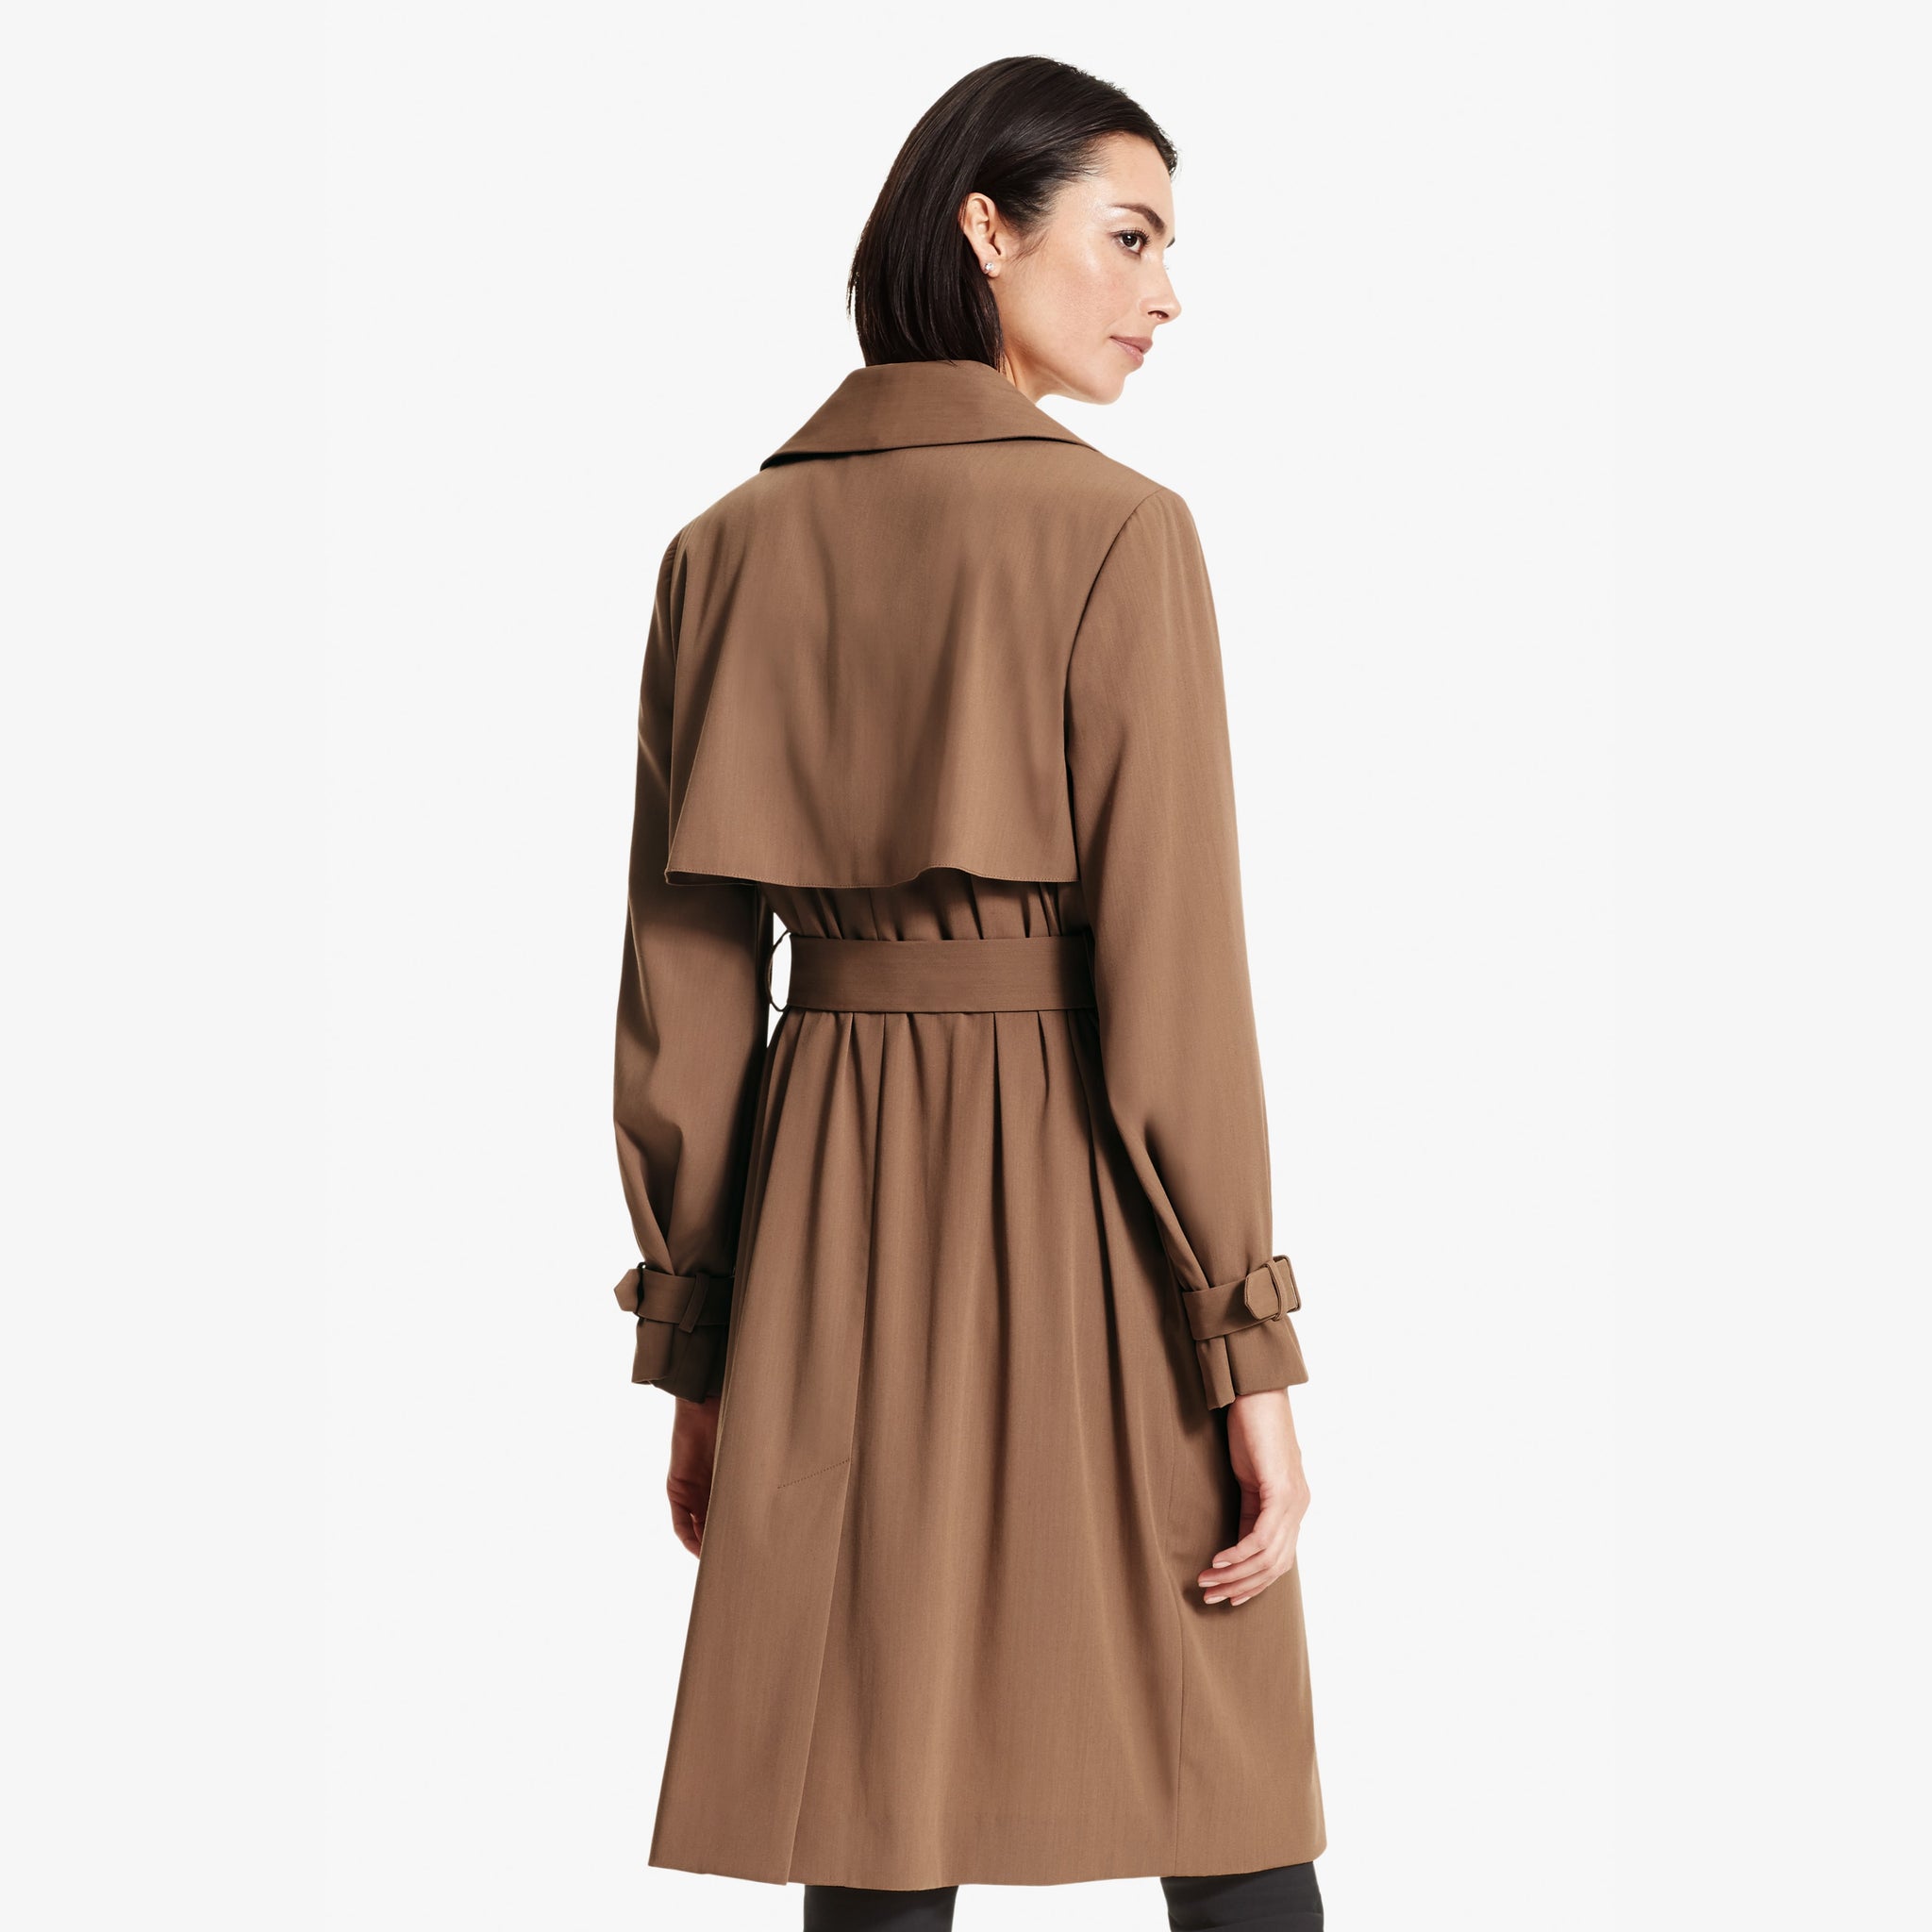 Back image of a woman standing wearing the Jensen trench in Saddle